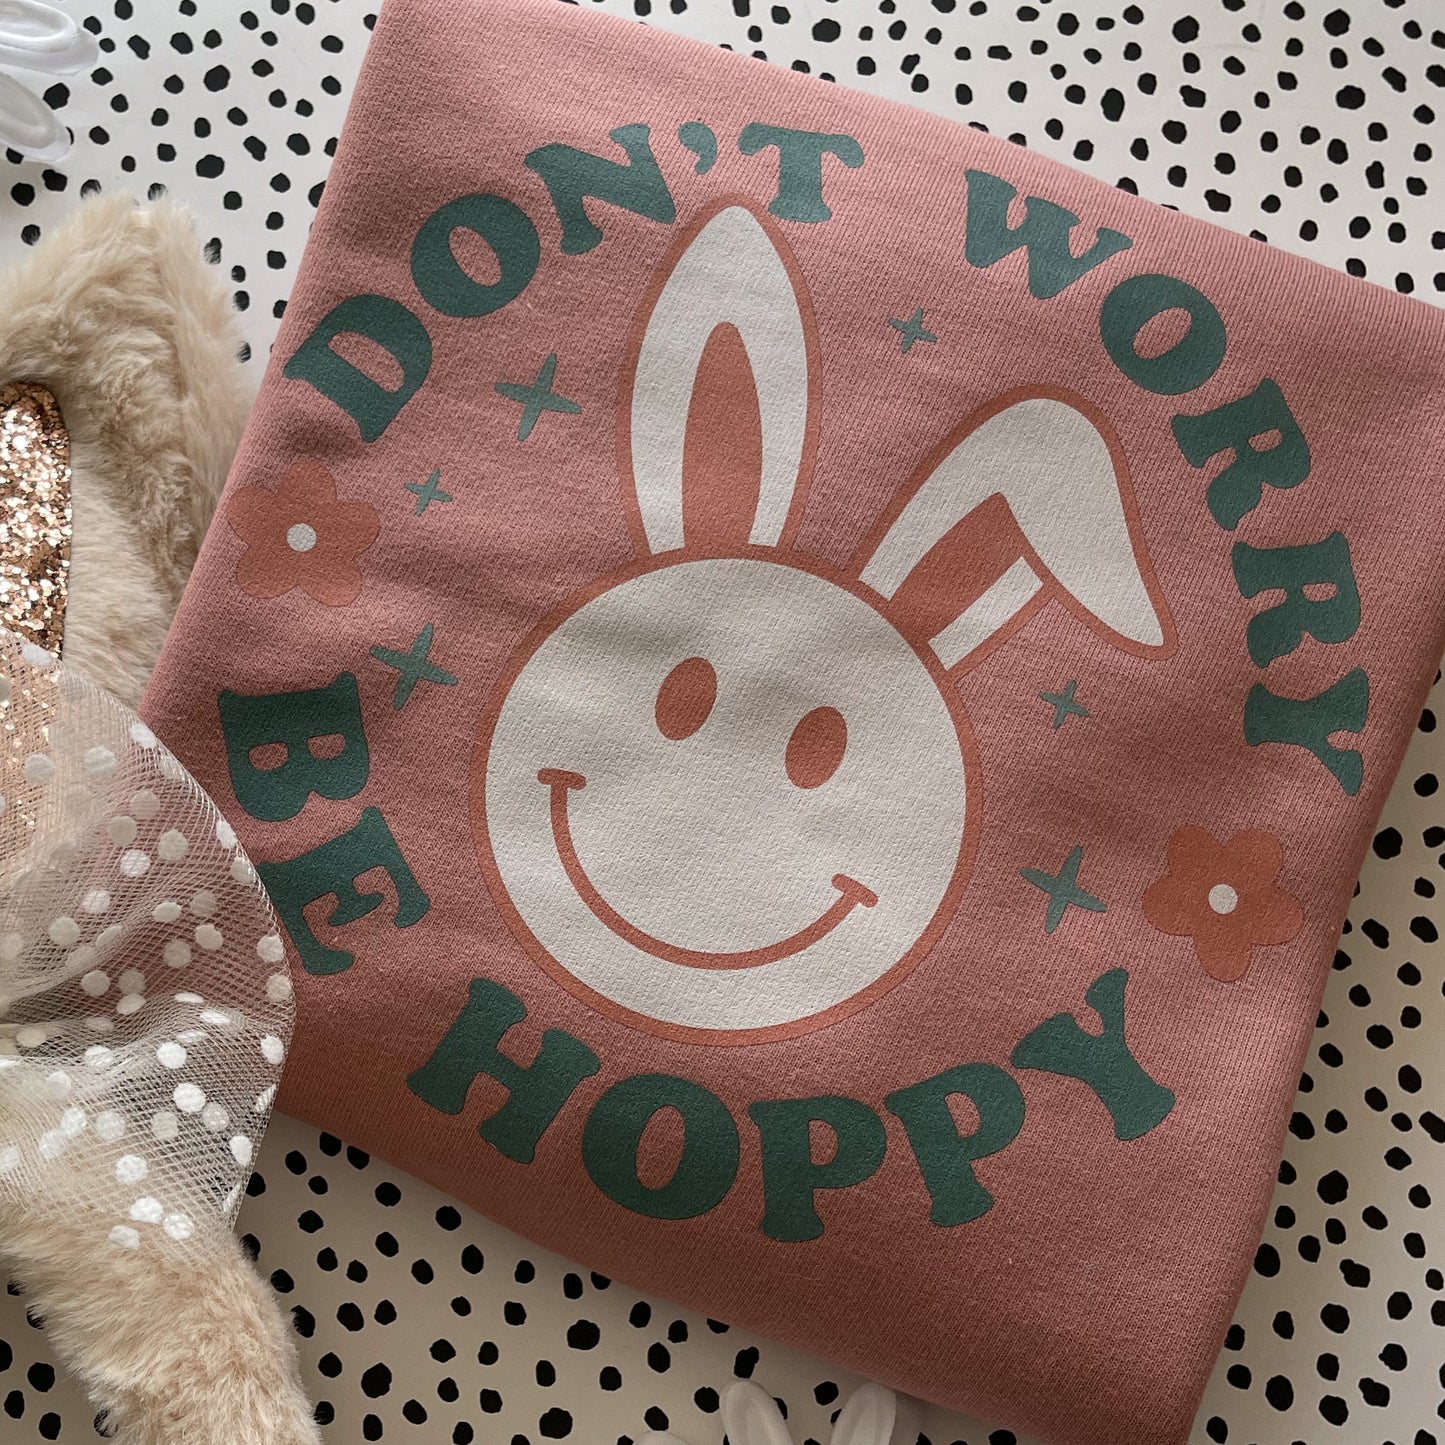 Don’t Worry Be Hoppy Adult Sweater